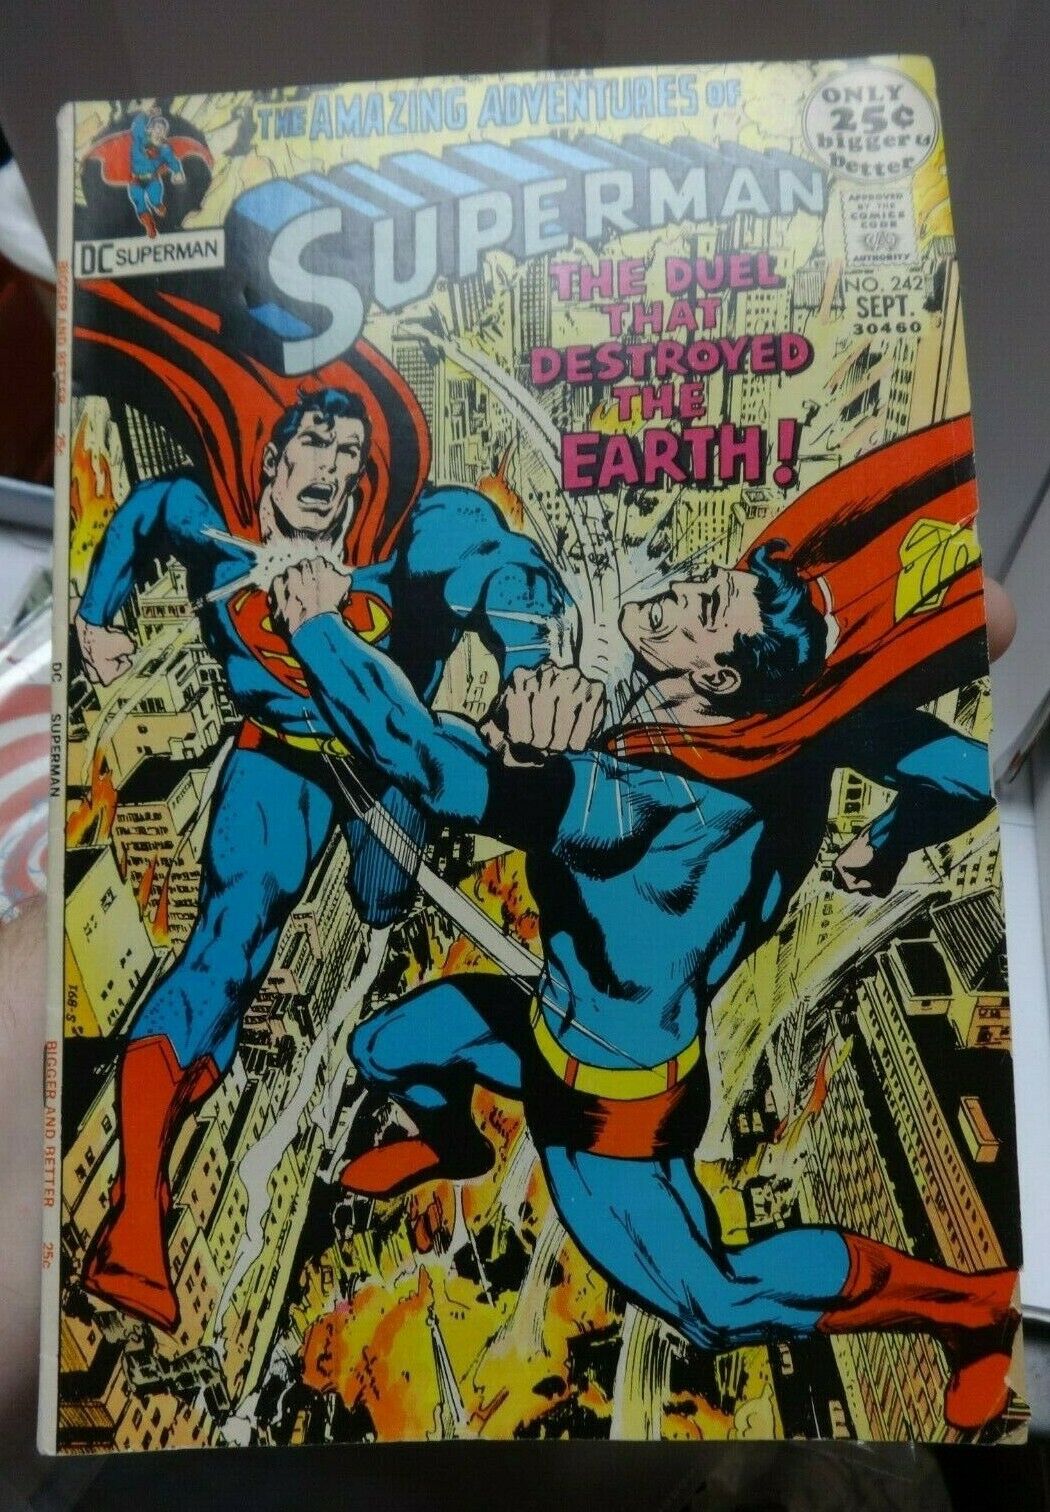 Superman #242 - The Dual That Destroyed The Earth - 1971 